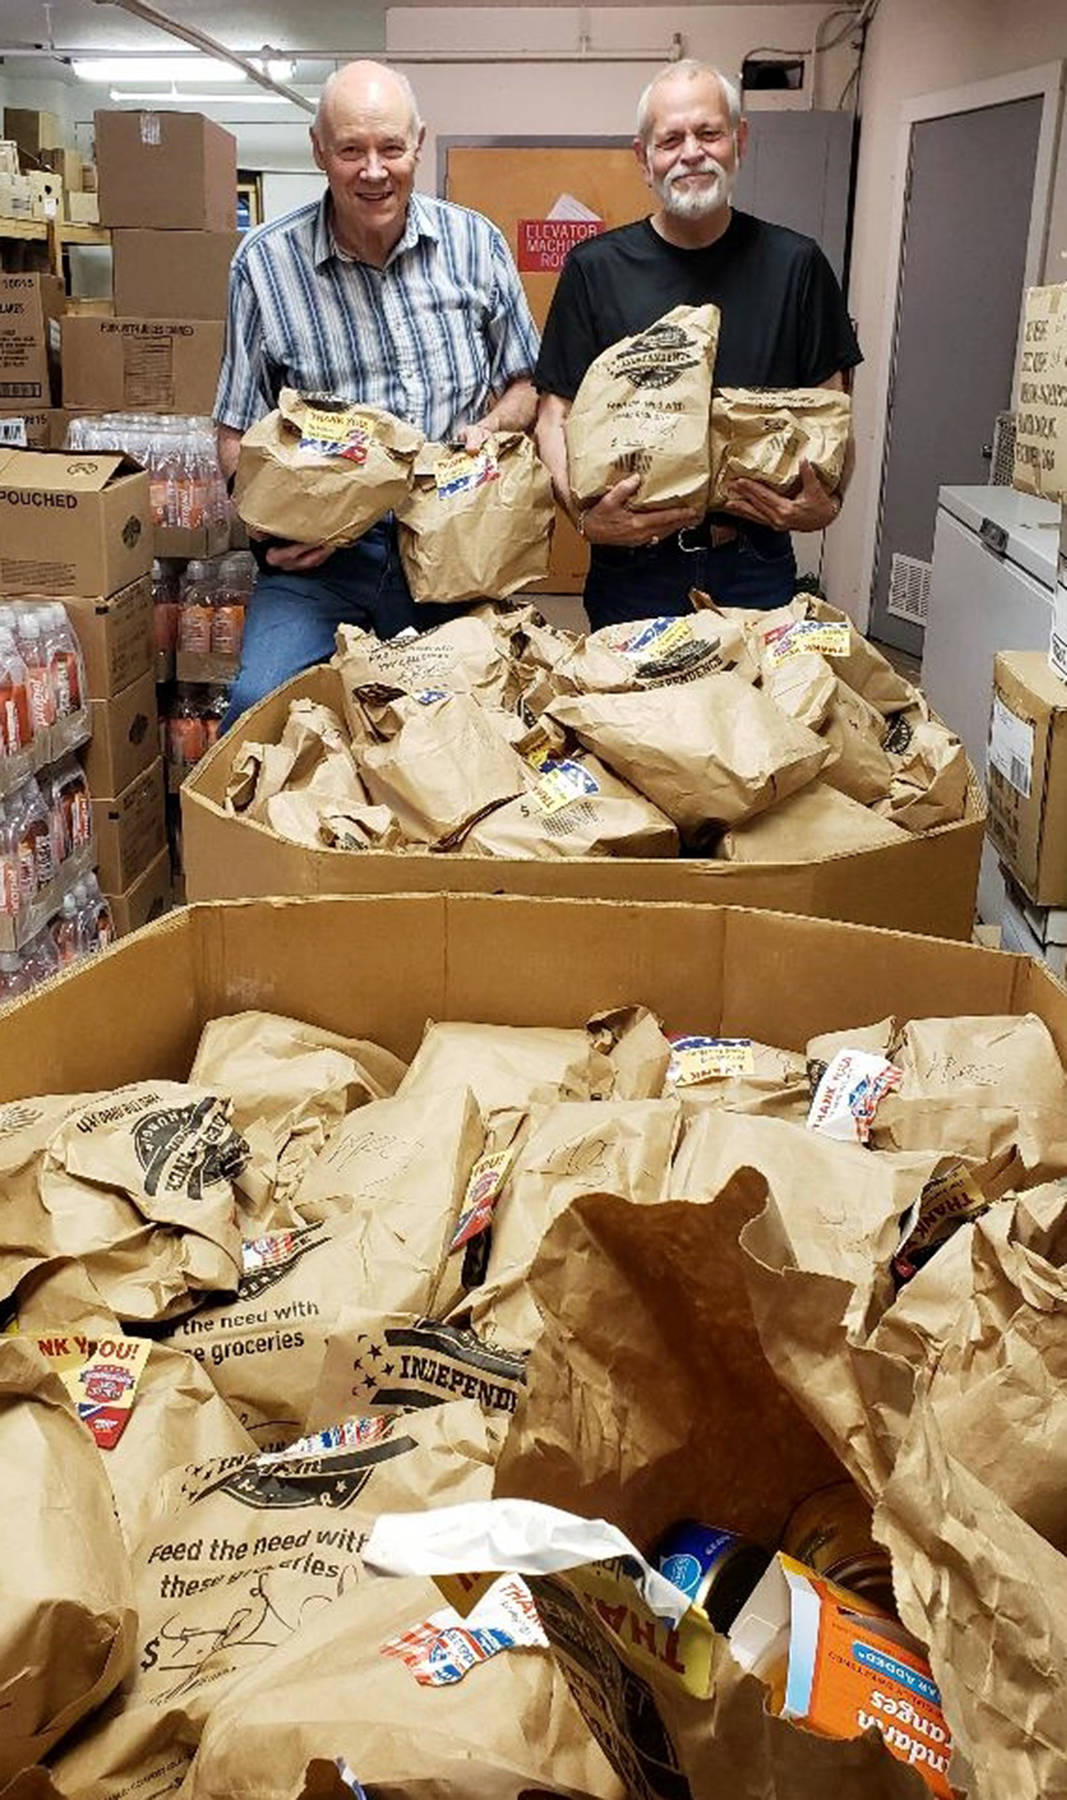 (Photo by Jennifer Chuks) John Dawson, left, and John Beck, volunteers at the Salvation Army Food Bank in Aberdeen, unload some of the bags of groceries recently donated by Grocery Outlet of Aberdeen. More than $6,800 worth of food was donated to local food banks.